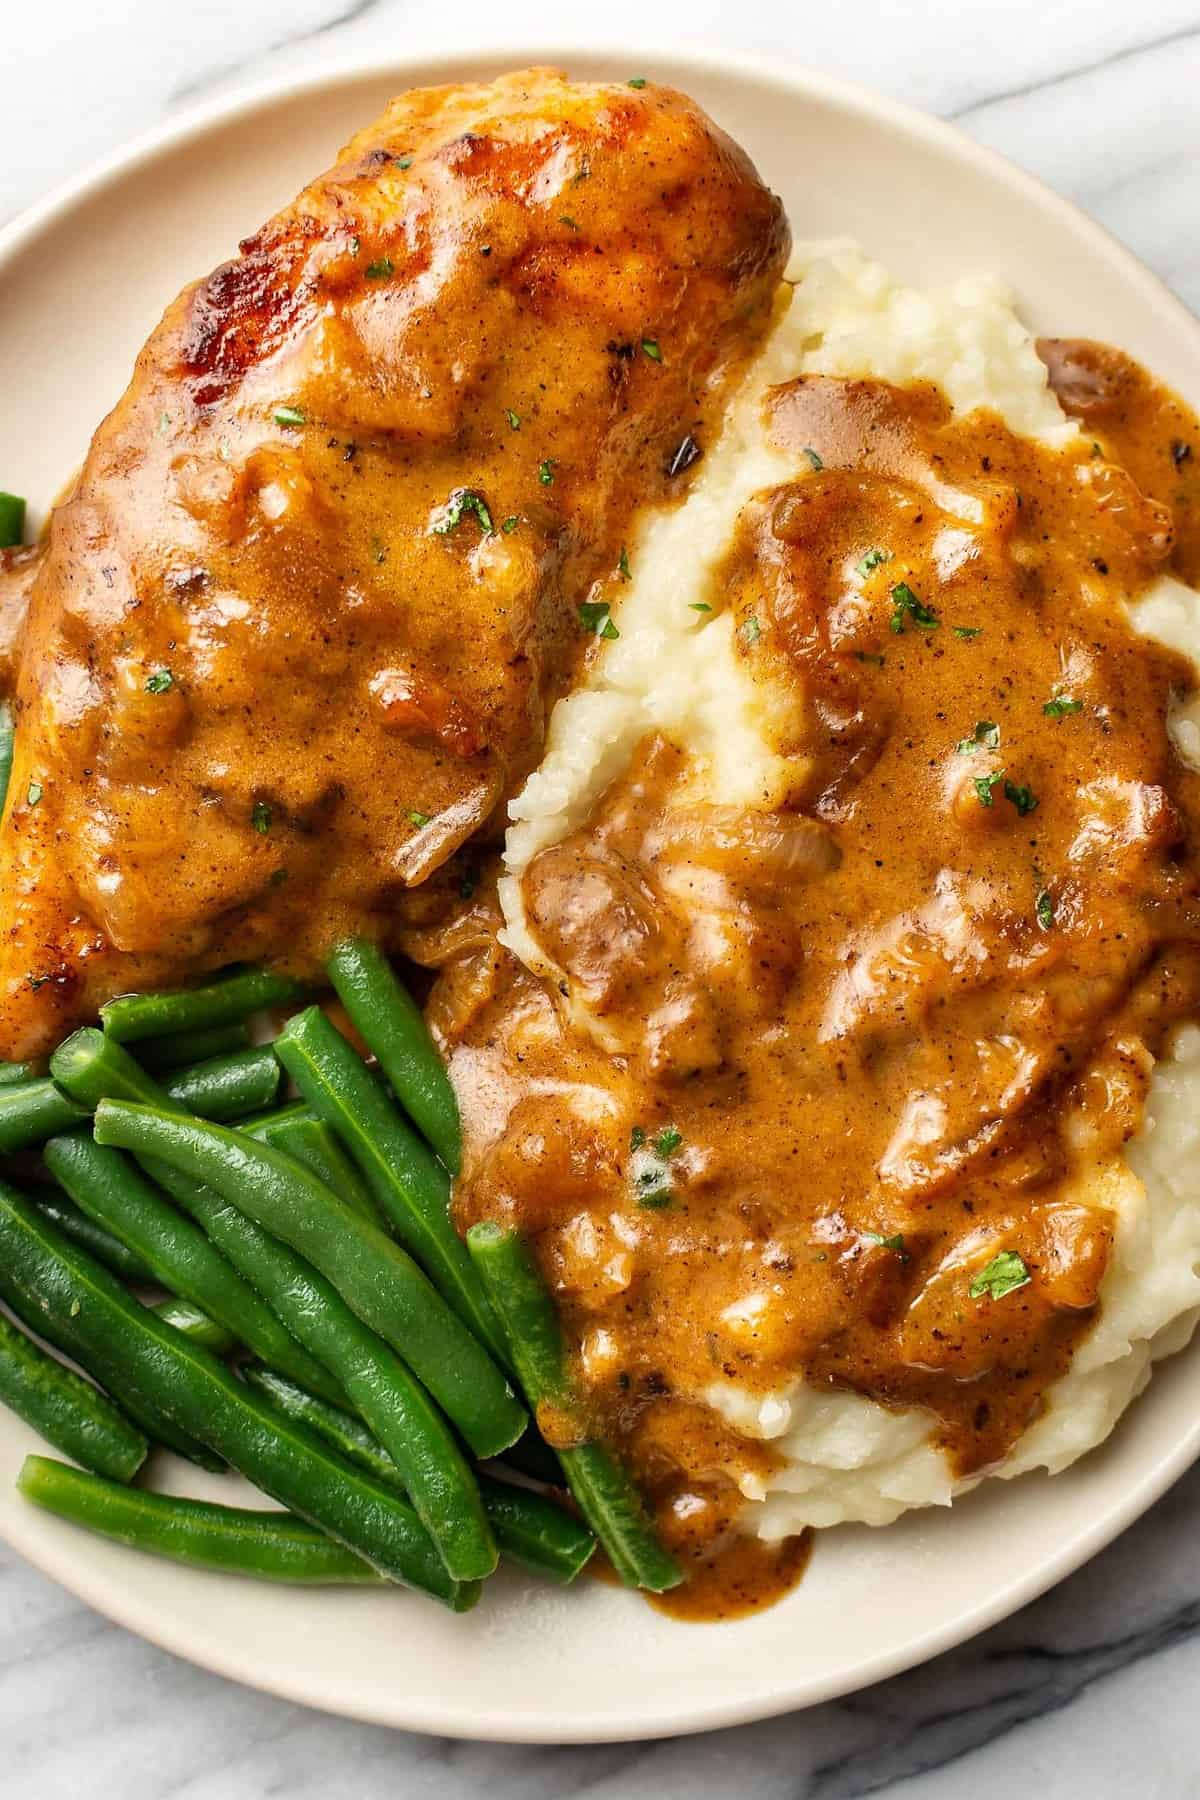  The marriage of flavors between the chicken and the smothered sauce is a match made in BBQ heaven.